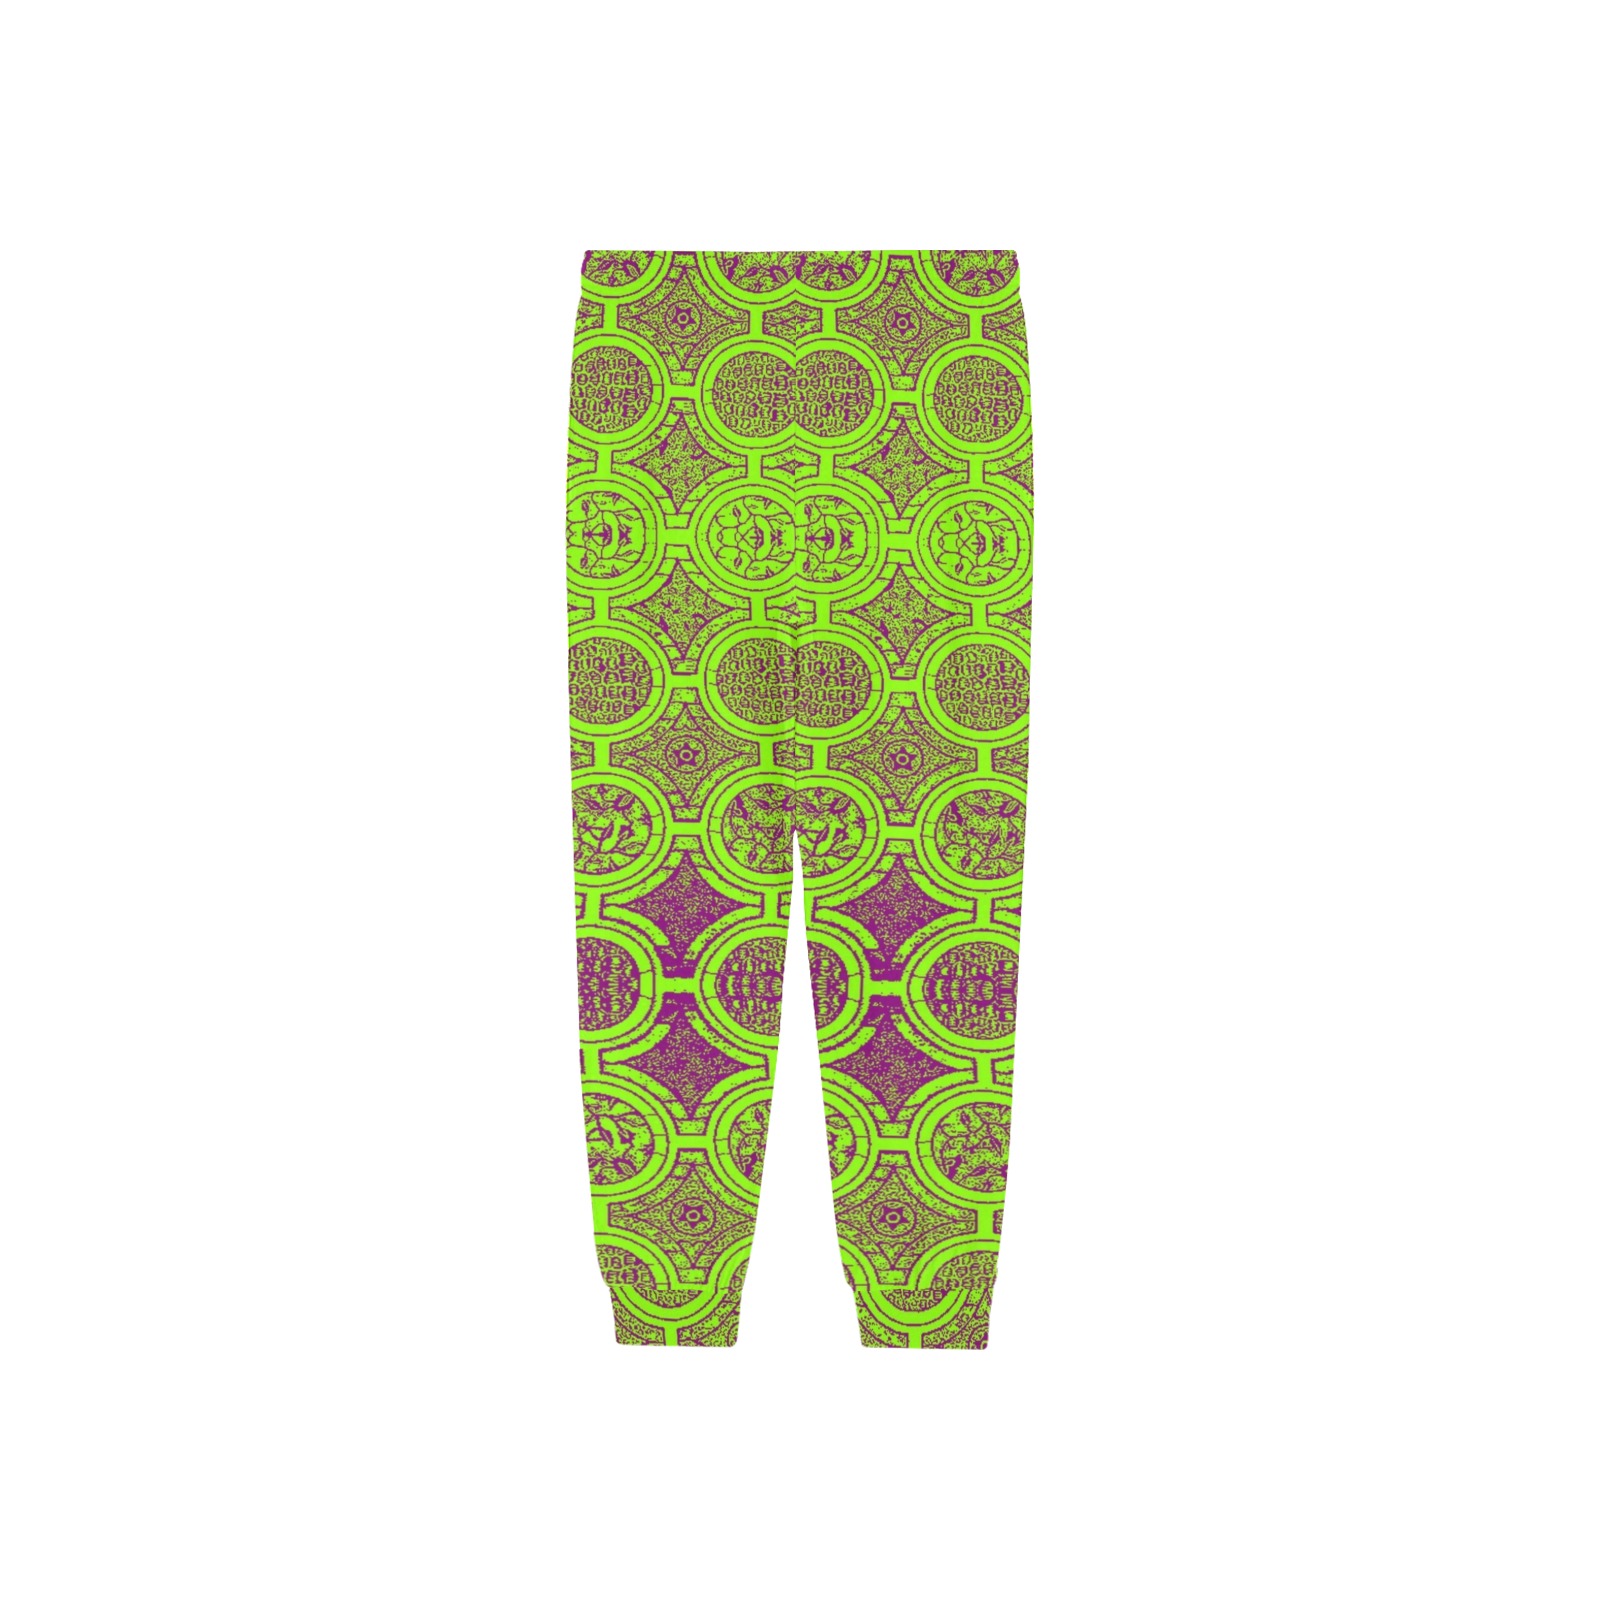 AFRICAN PRINT PATTERN 2 Men's Pajama Trousers with Custom Cuff